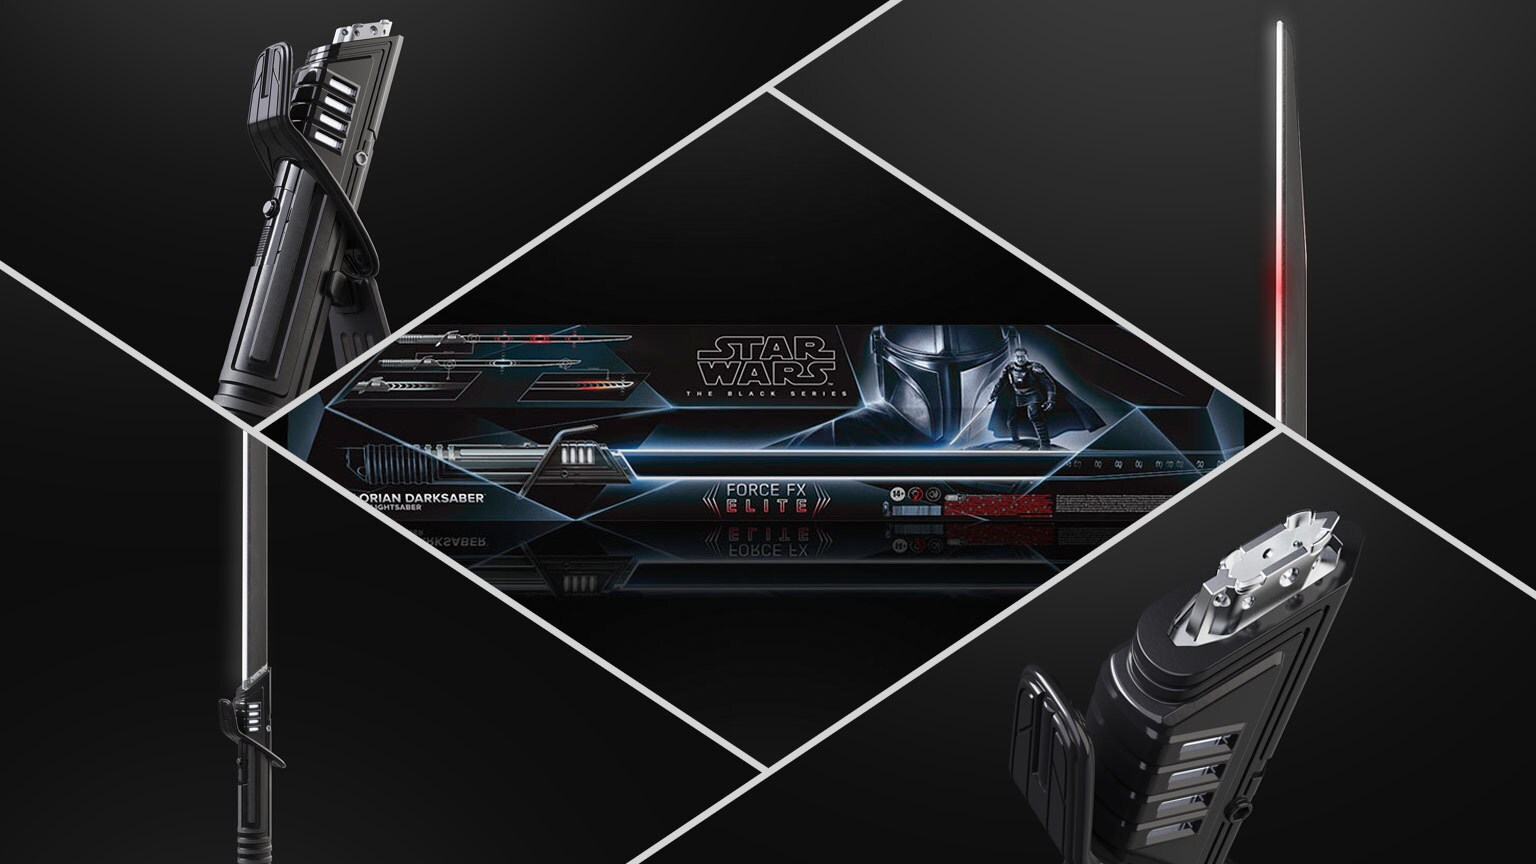 5 Illuminating Facts About the Making of Hasbro's Force FX Elite Darksaber